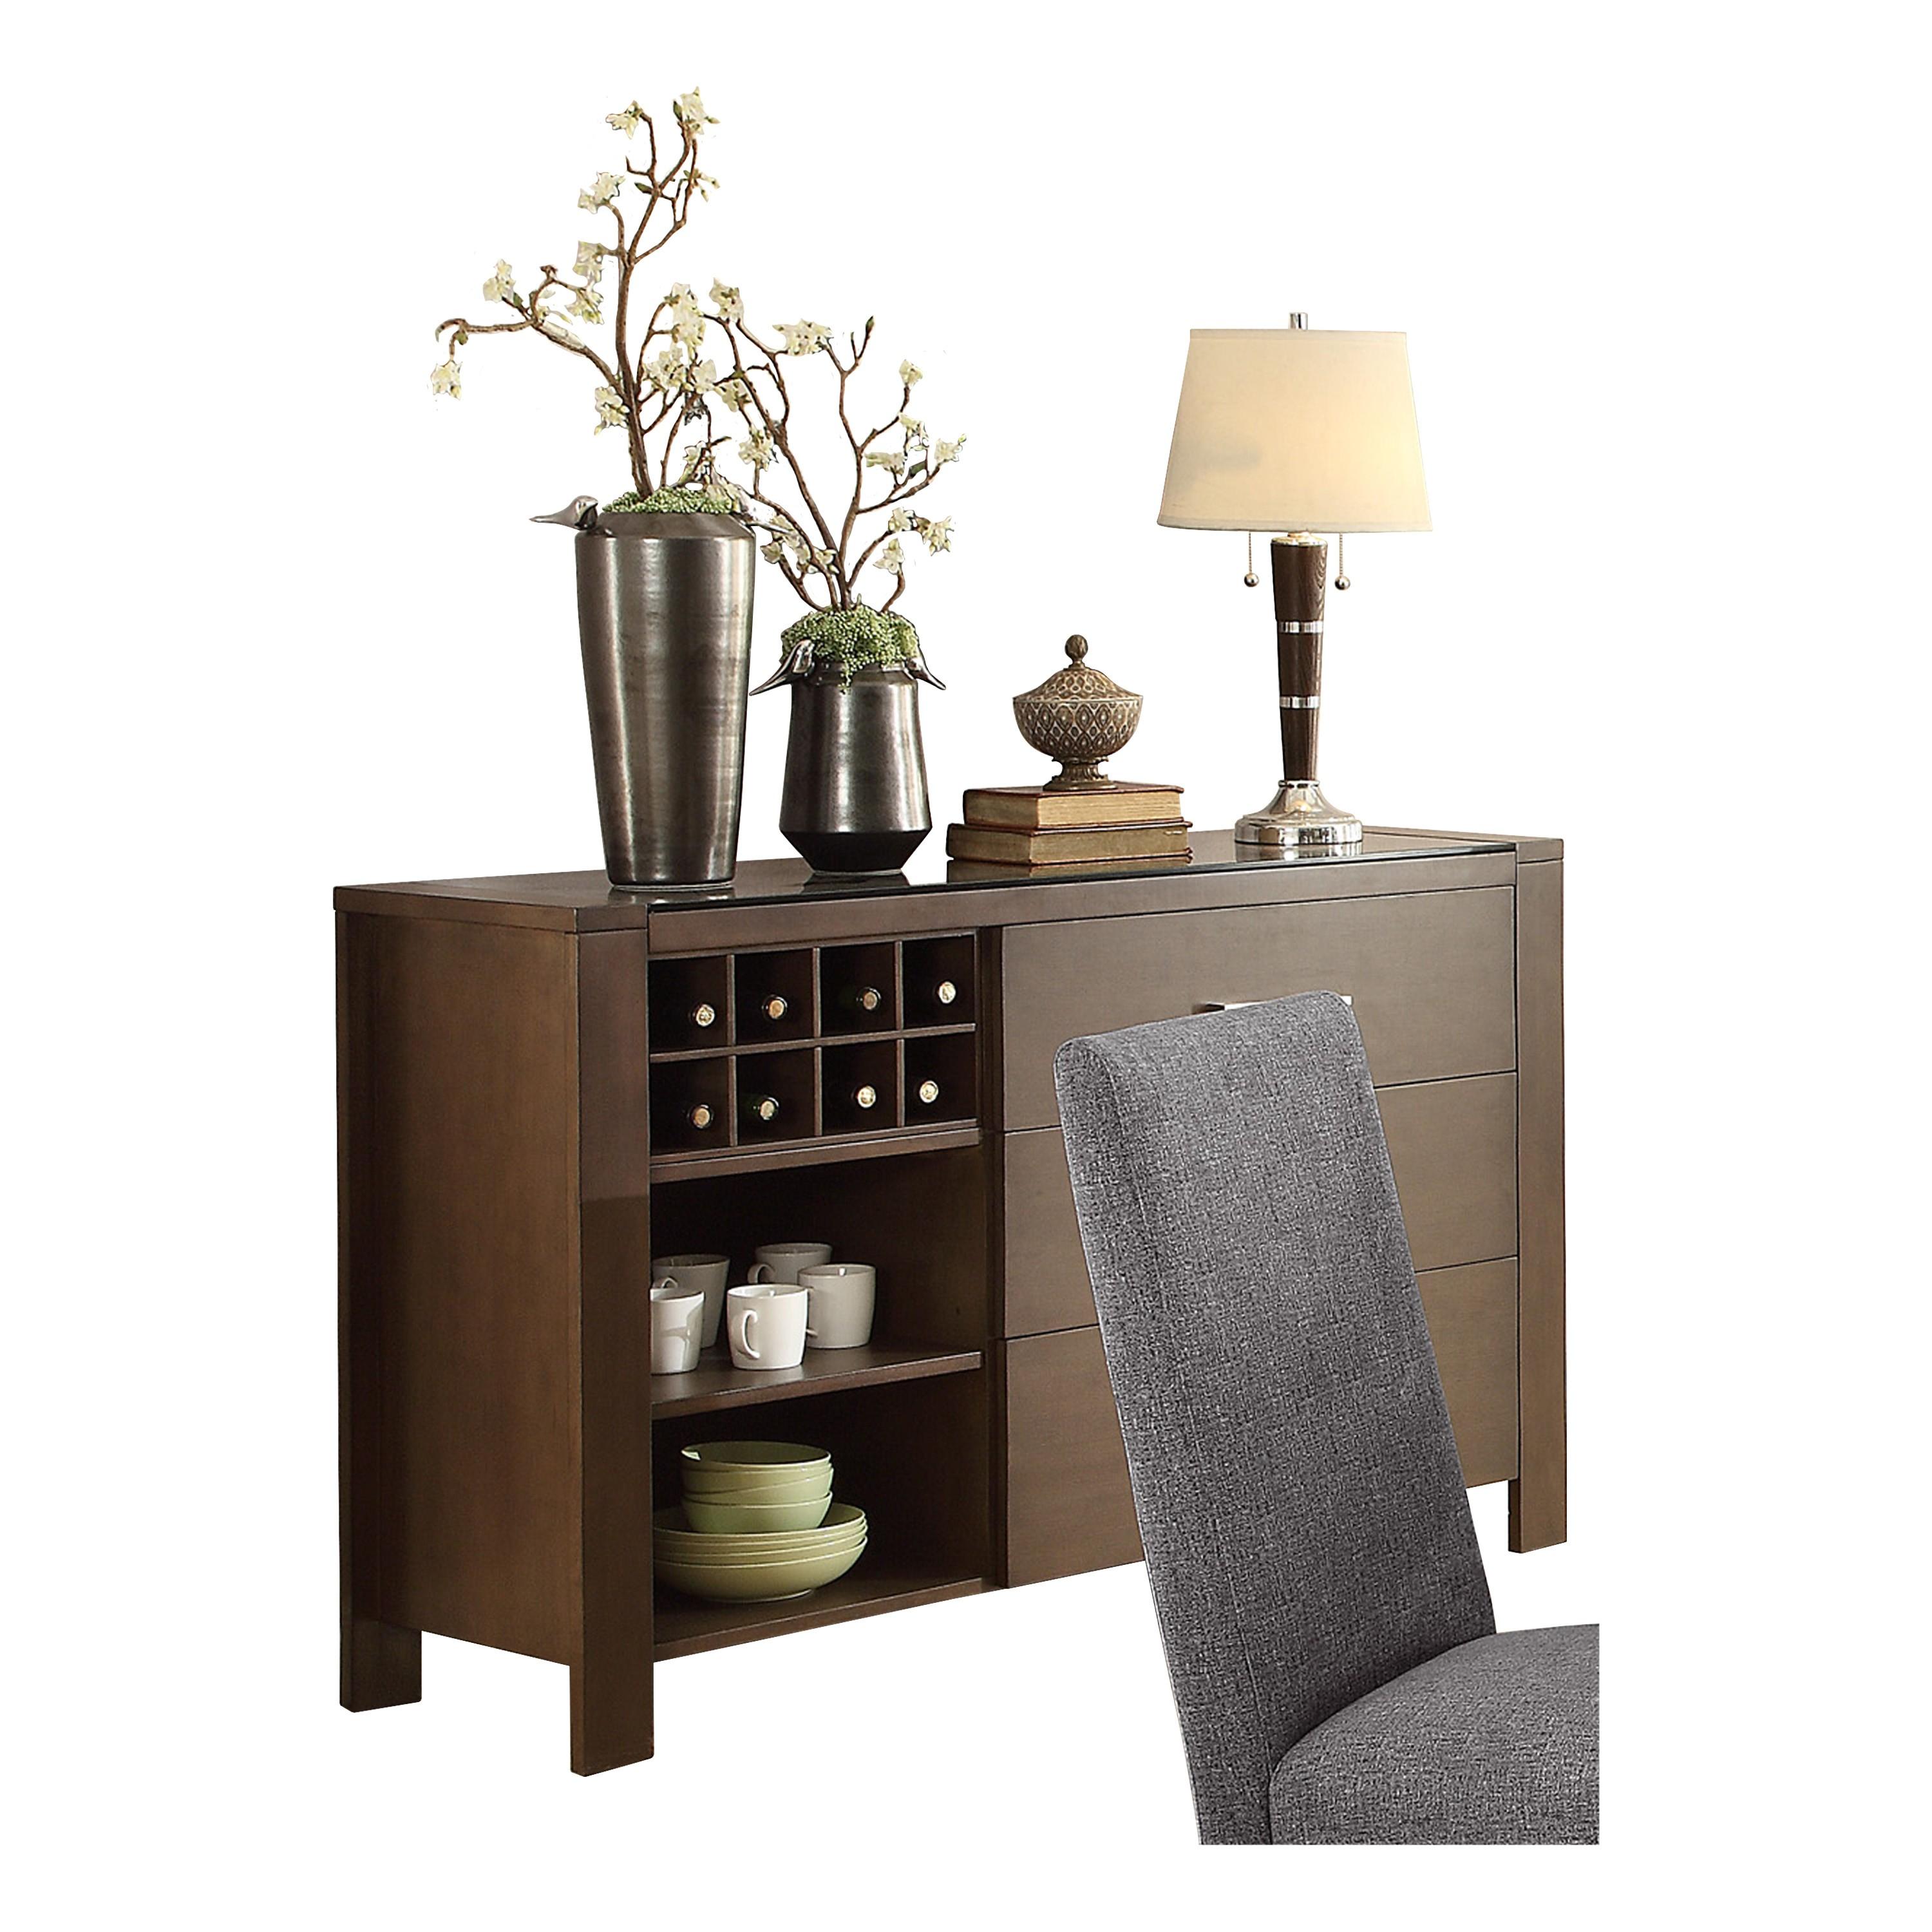 Modern, Classic Server Fielding Collection Server 5525-40-S 5525-40-S in Brown 